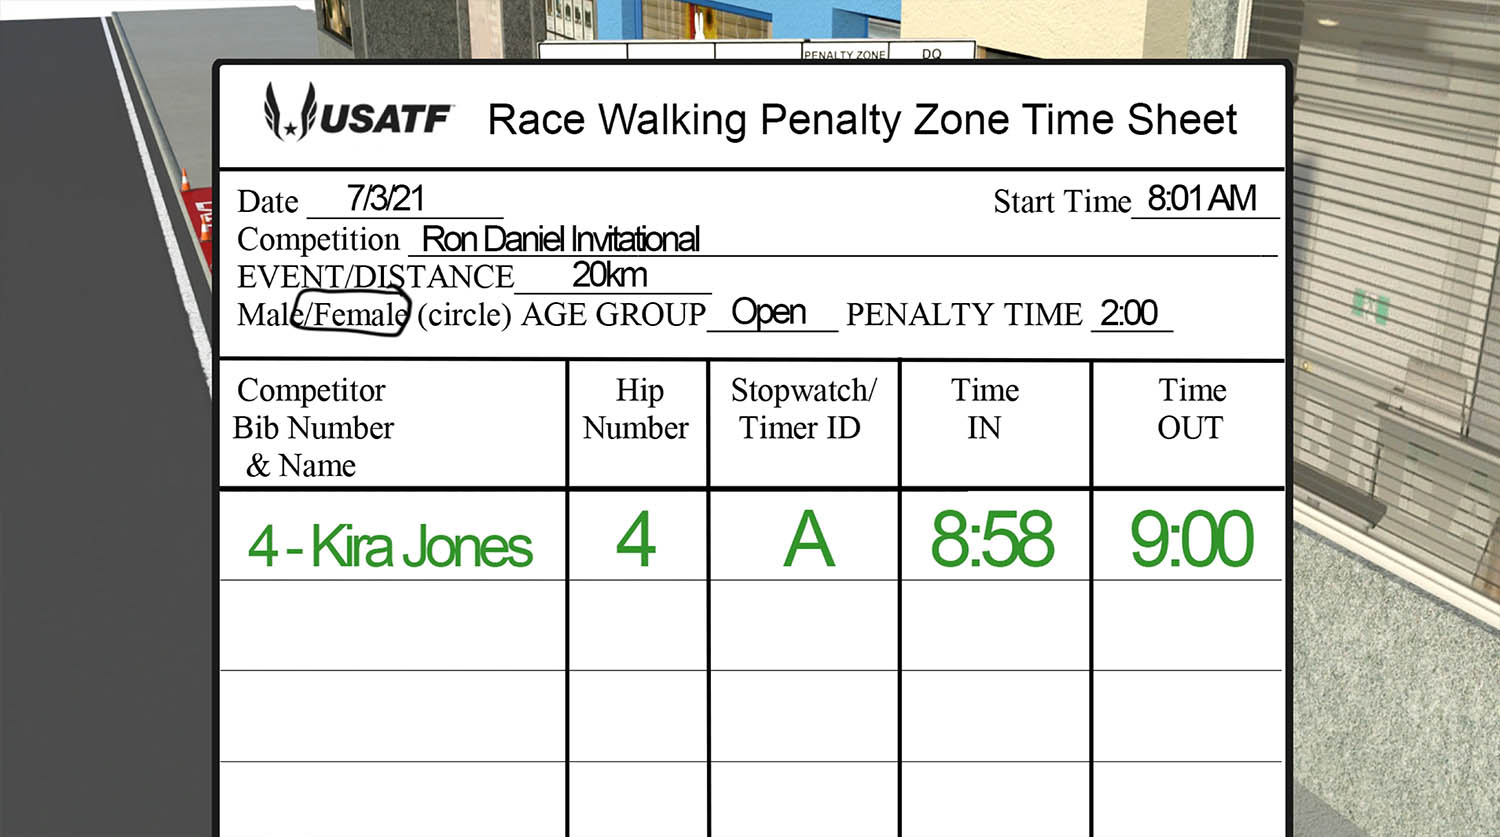 First Row on the Penalty Zone Sheet